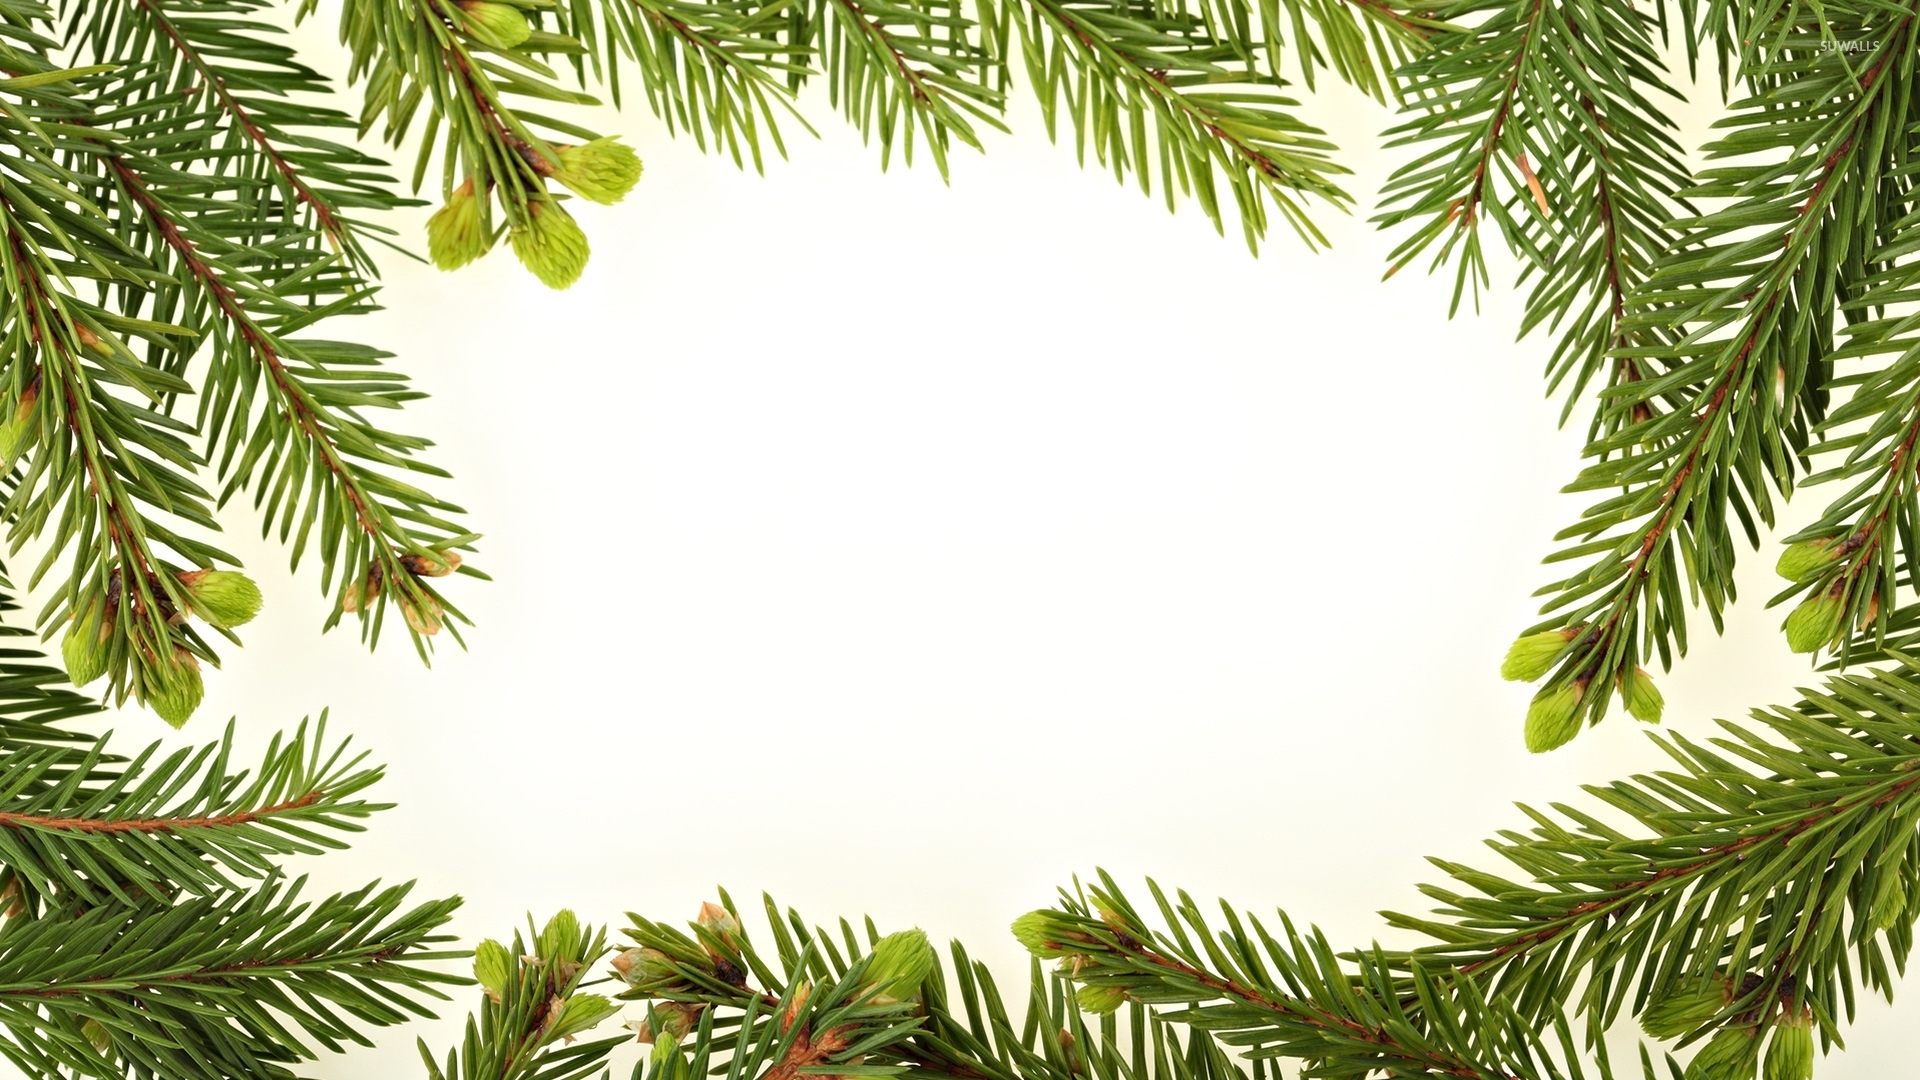 Fir branches wallpaper - Holiday wallpapers - #50659